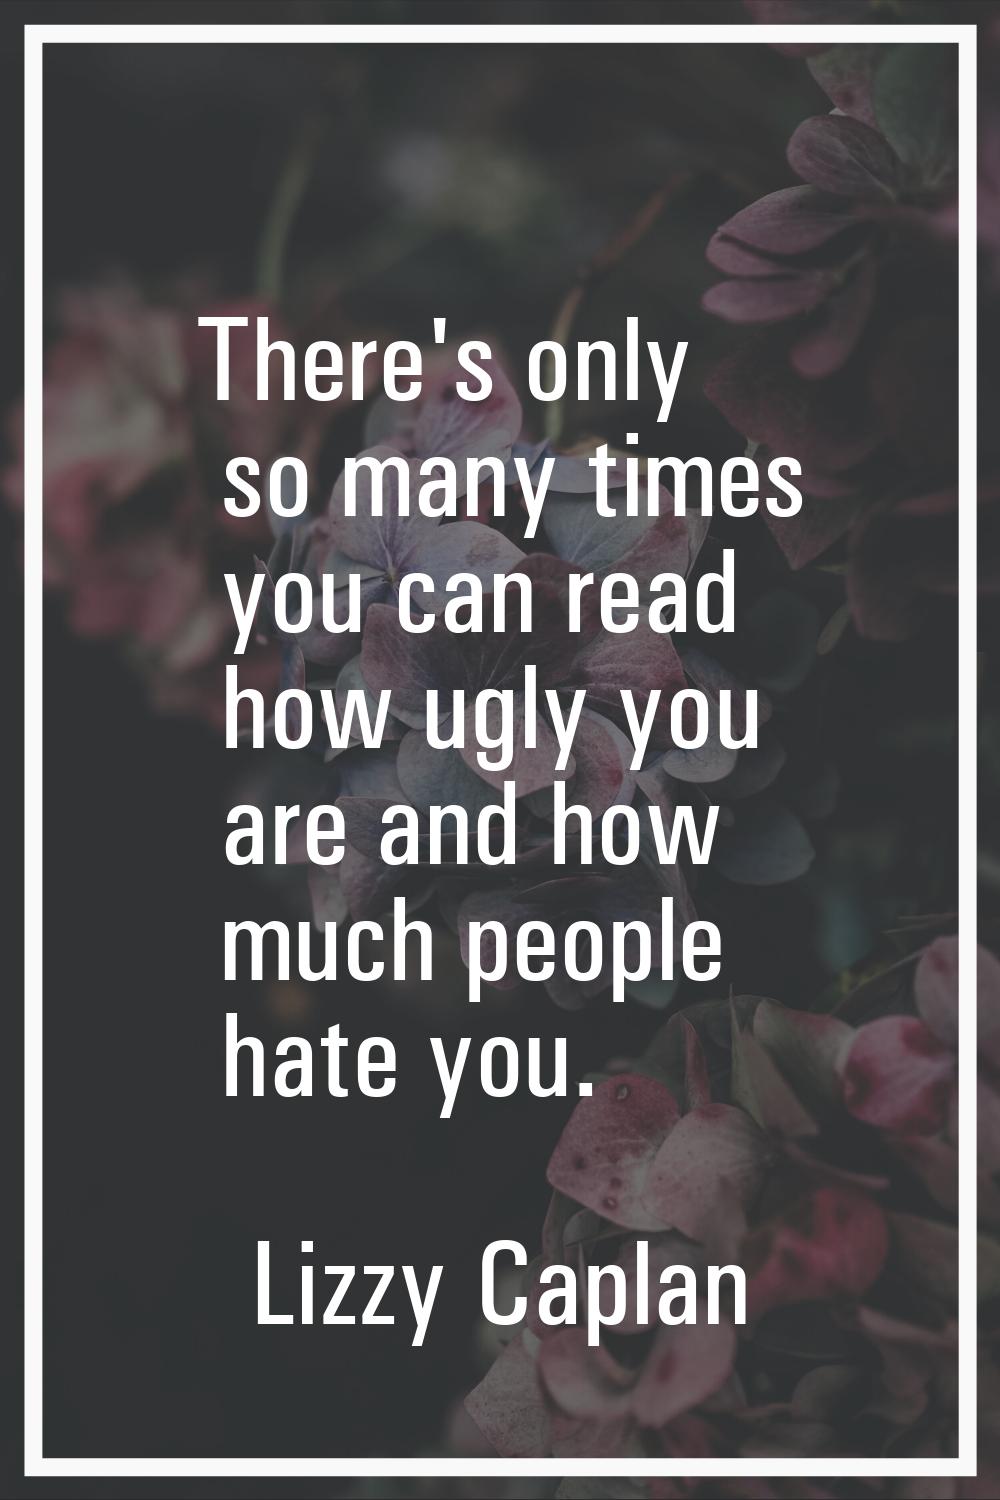 There's only so many times you can read how ugly you are and how much people hate you.